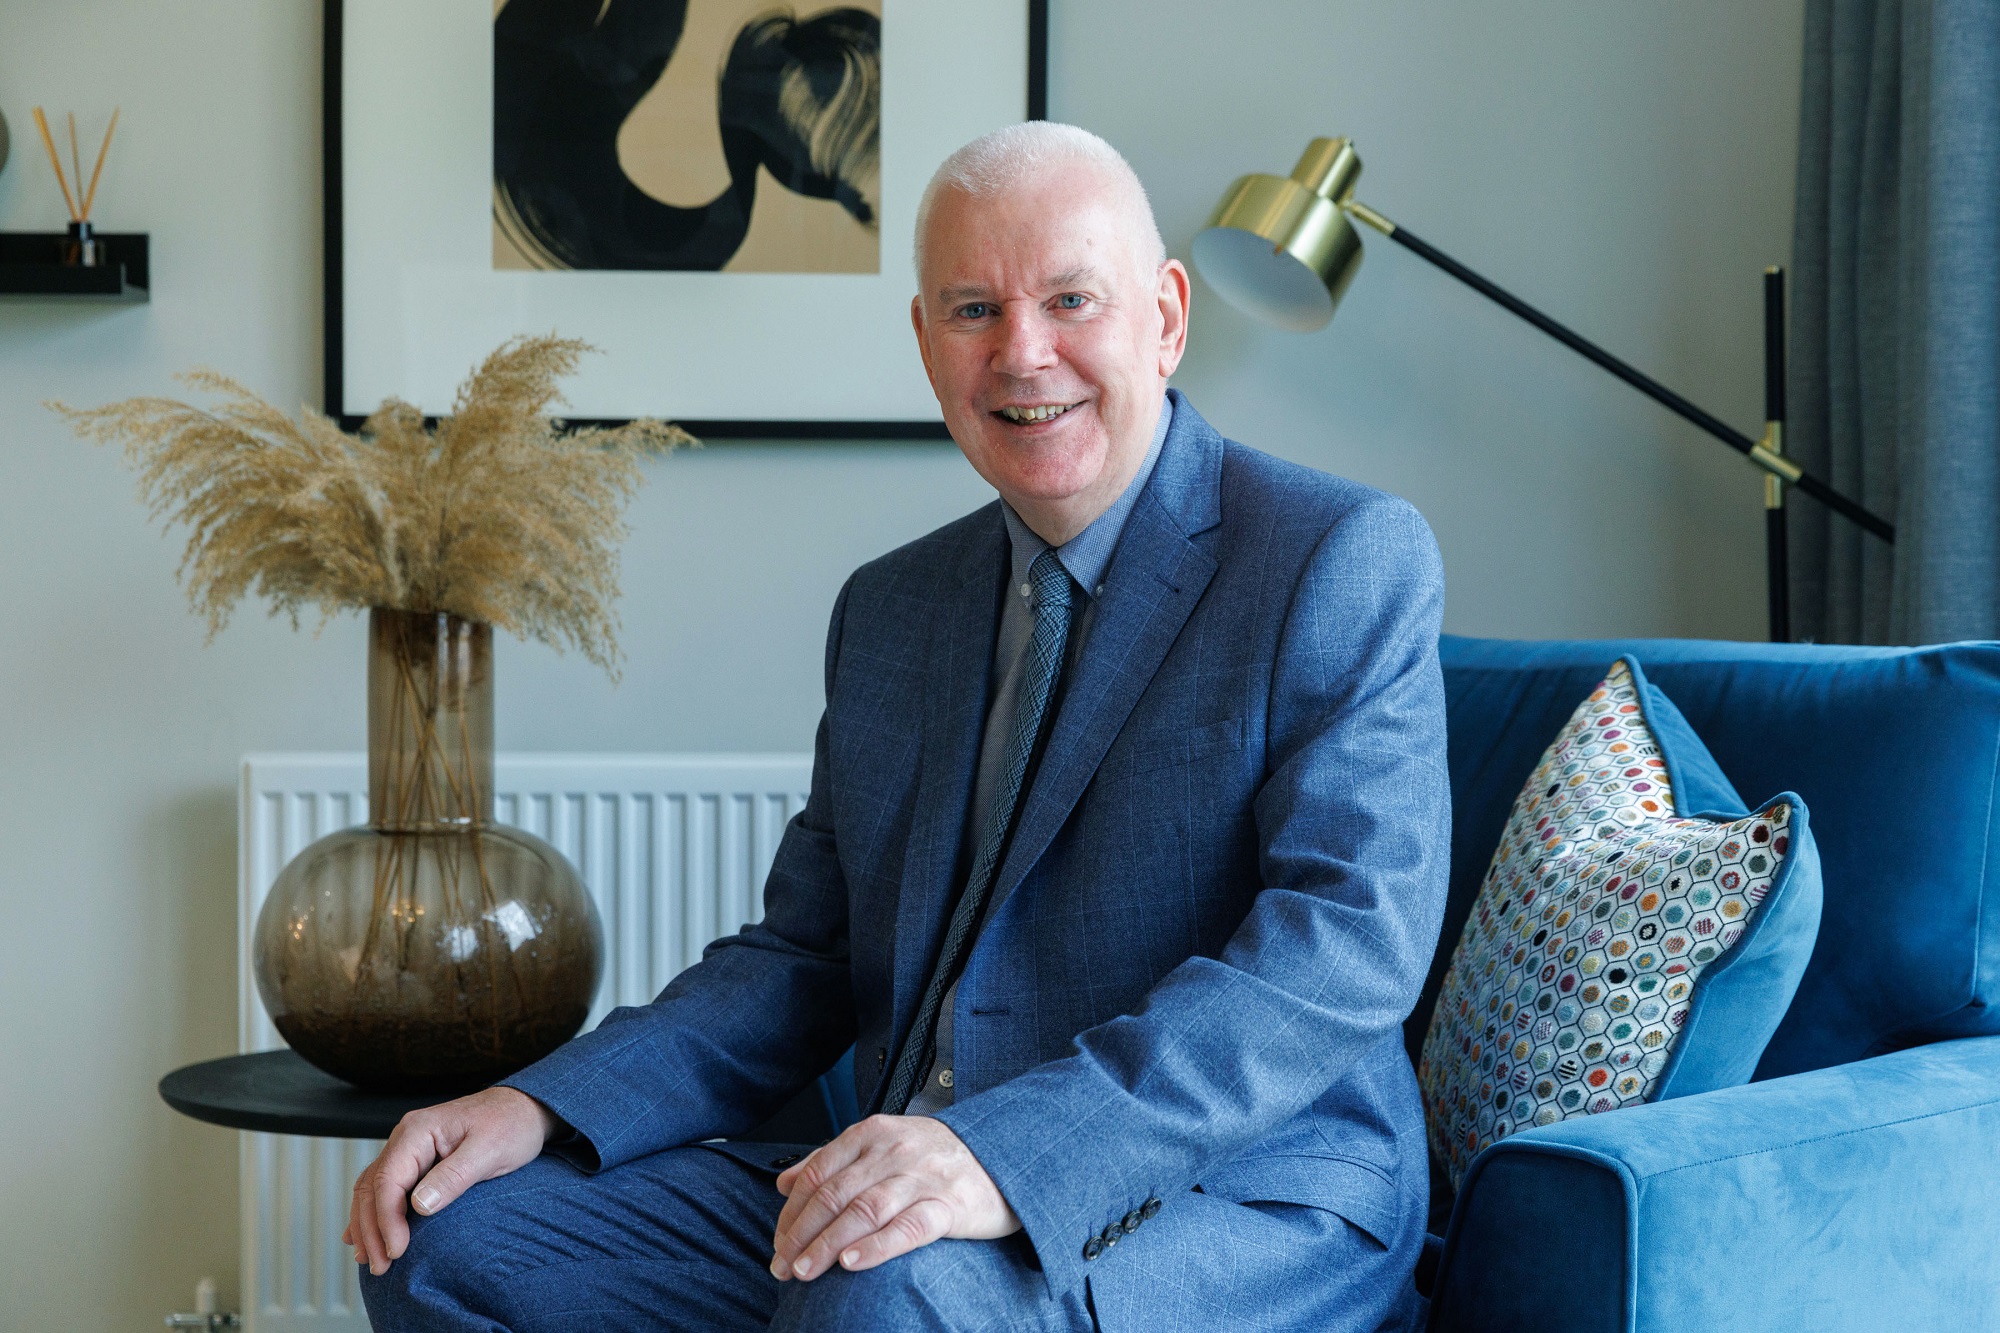 Iain Innes to lead ongoing expansion of Avant Homes Scotland